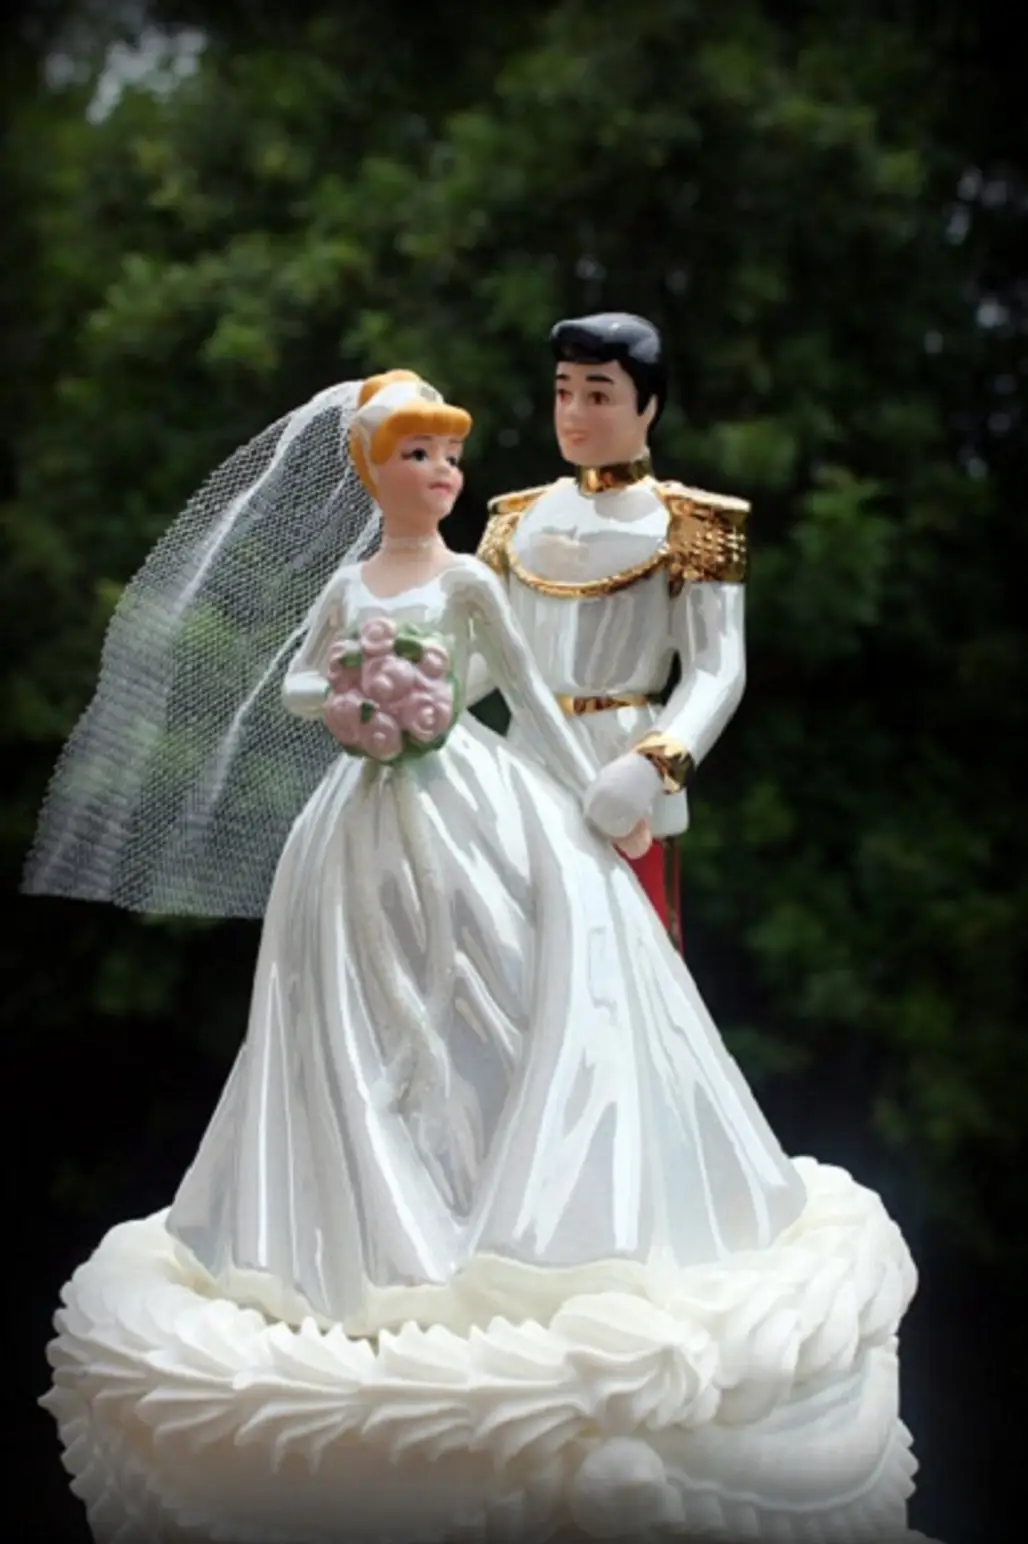 Prince Charming Cake Topper...